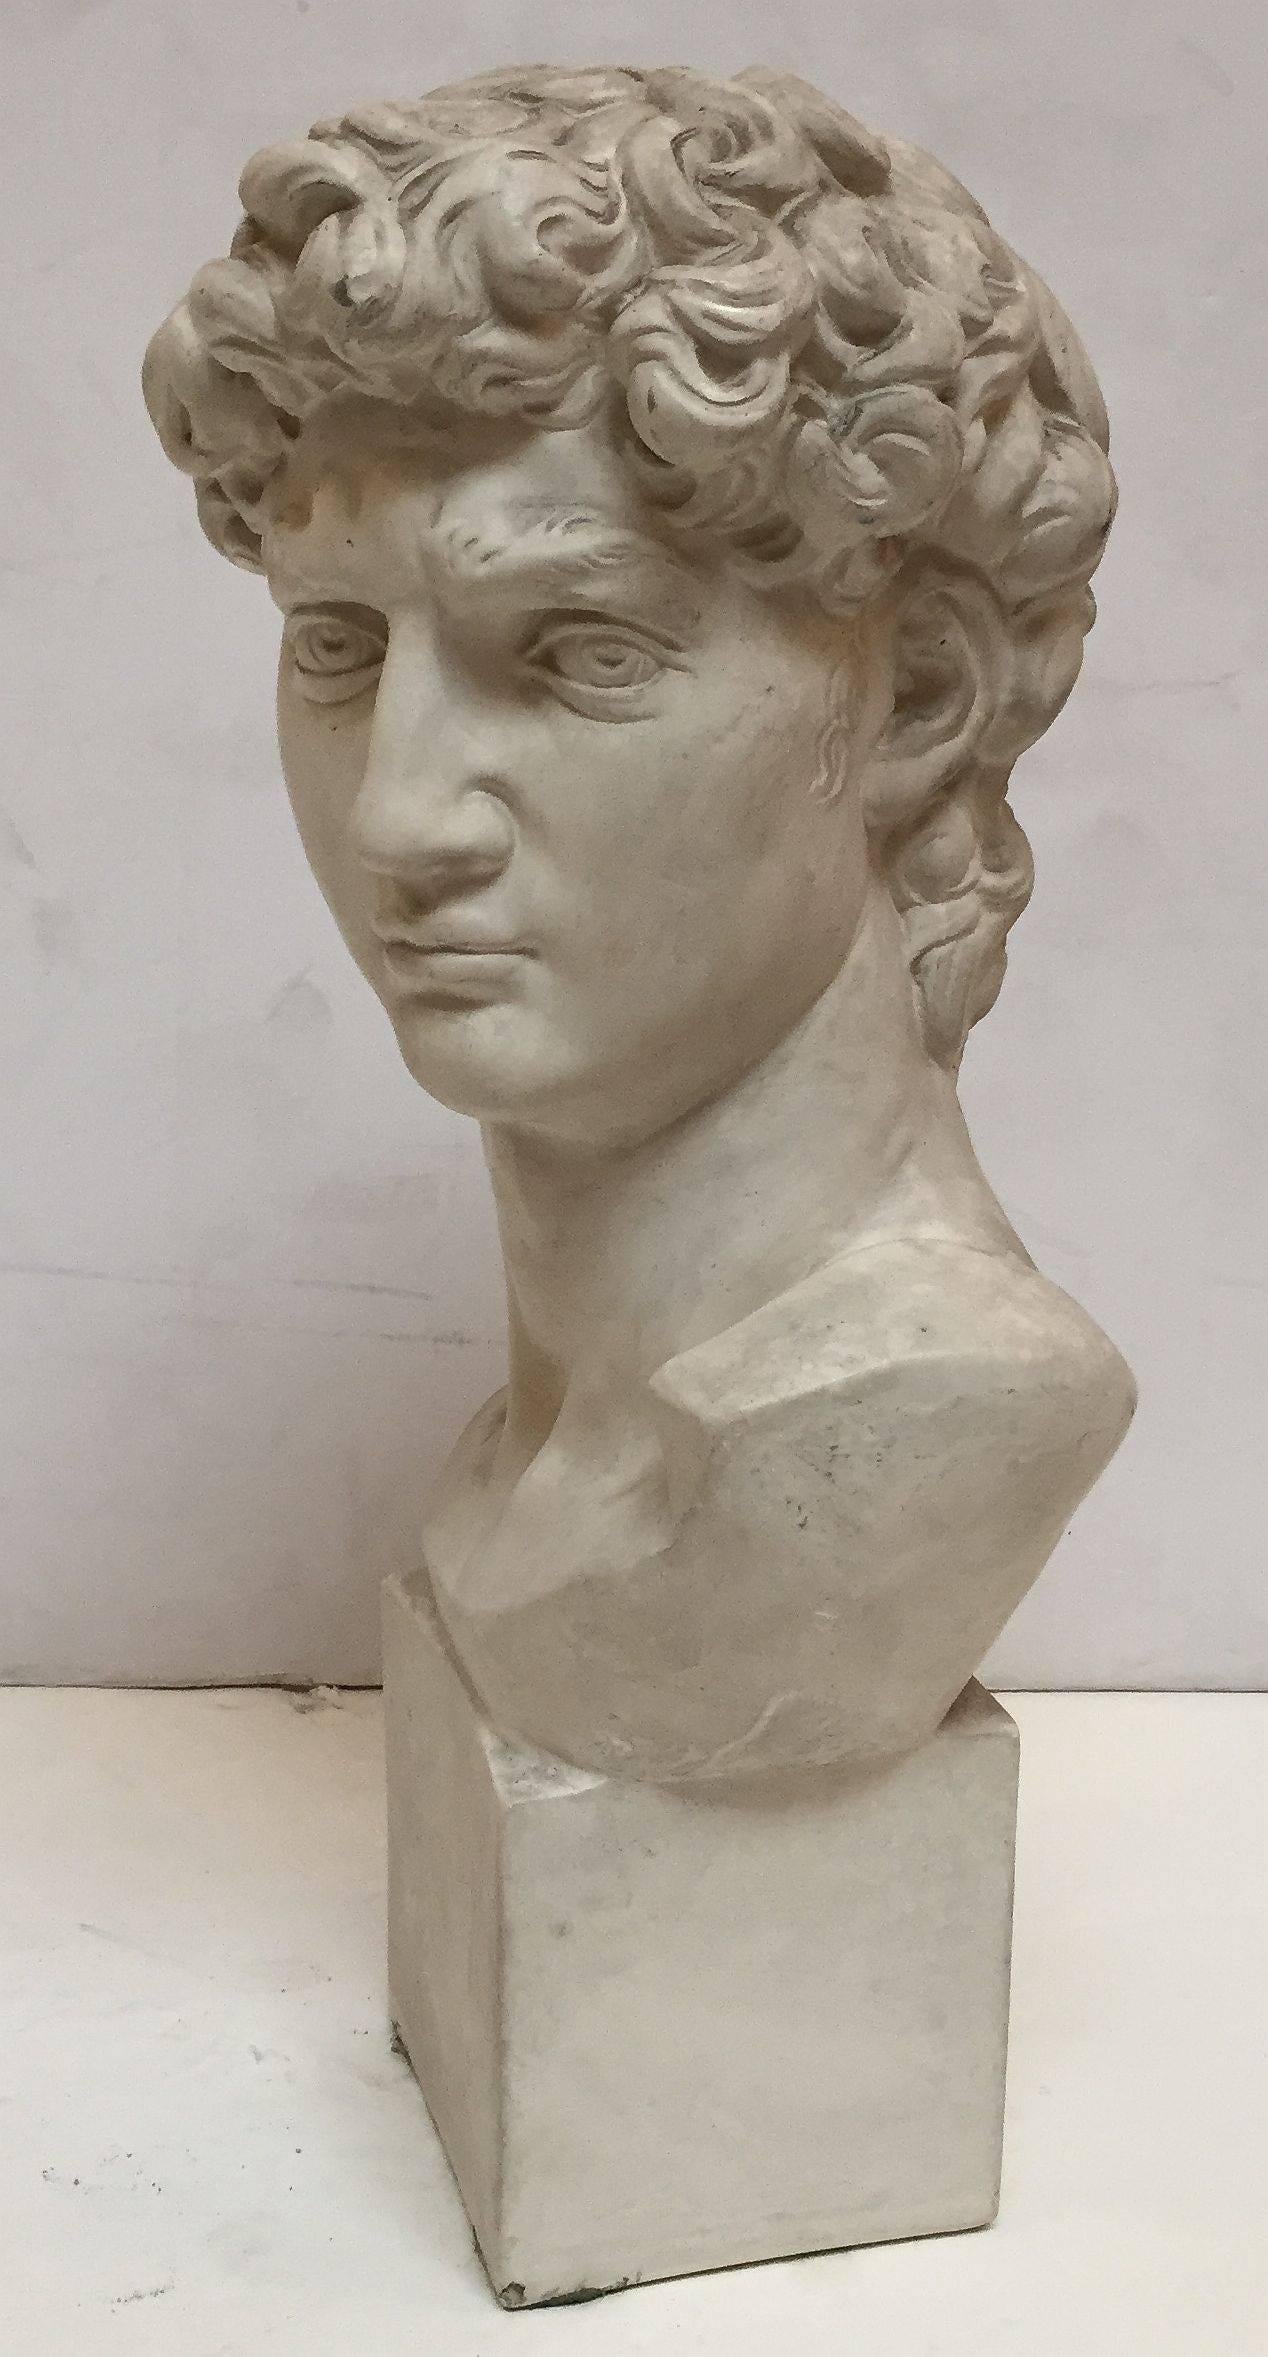 A fine large English plaster bust of Michelangelo's David, most likely used as an art school prop for still life painting.